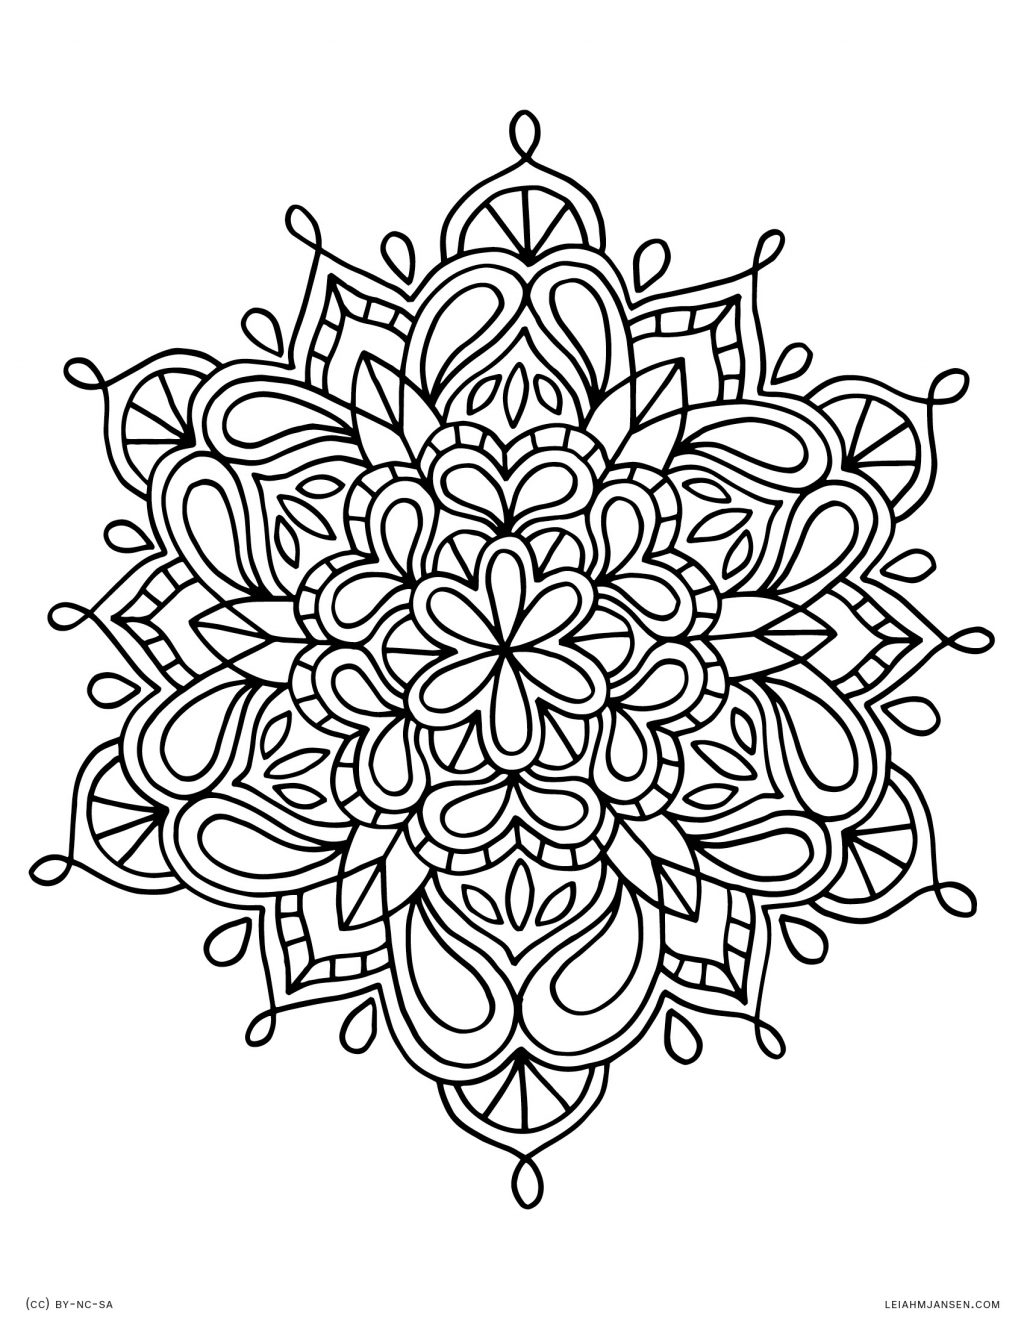 Mandala Color Pages Coloring Pages Printable Mandala Coloring Pages For Adults